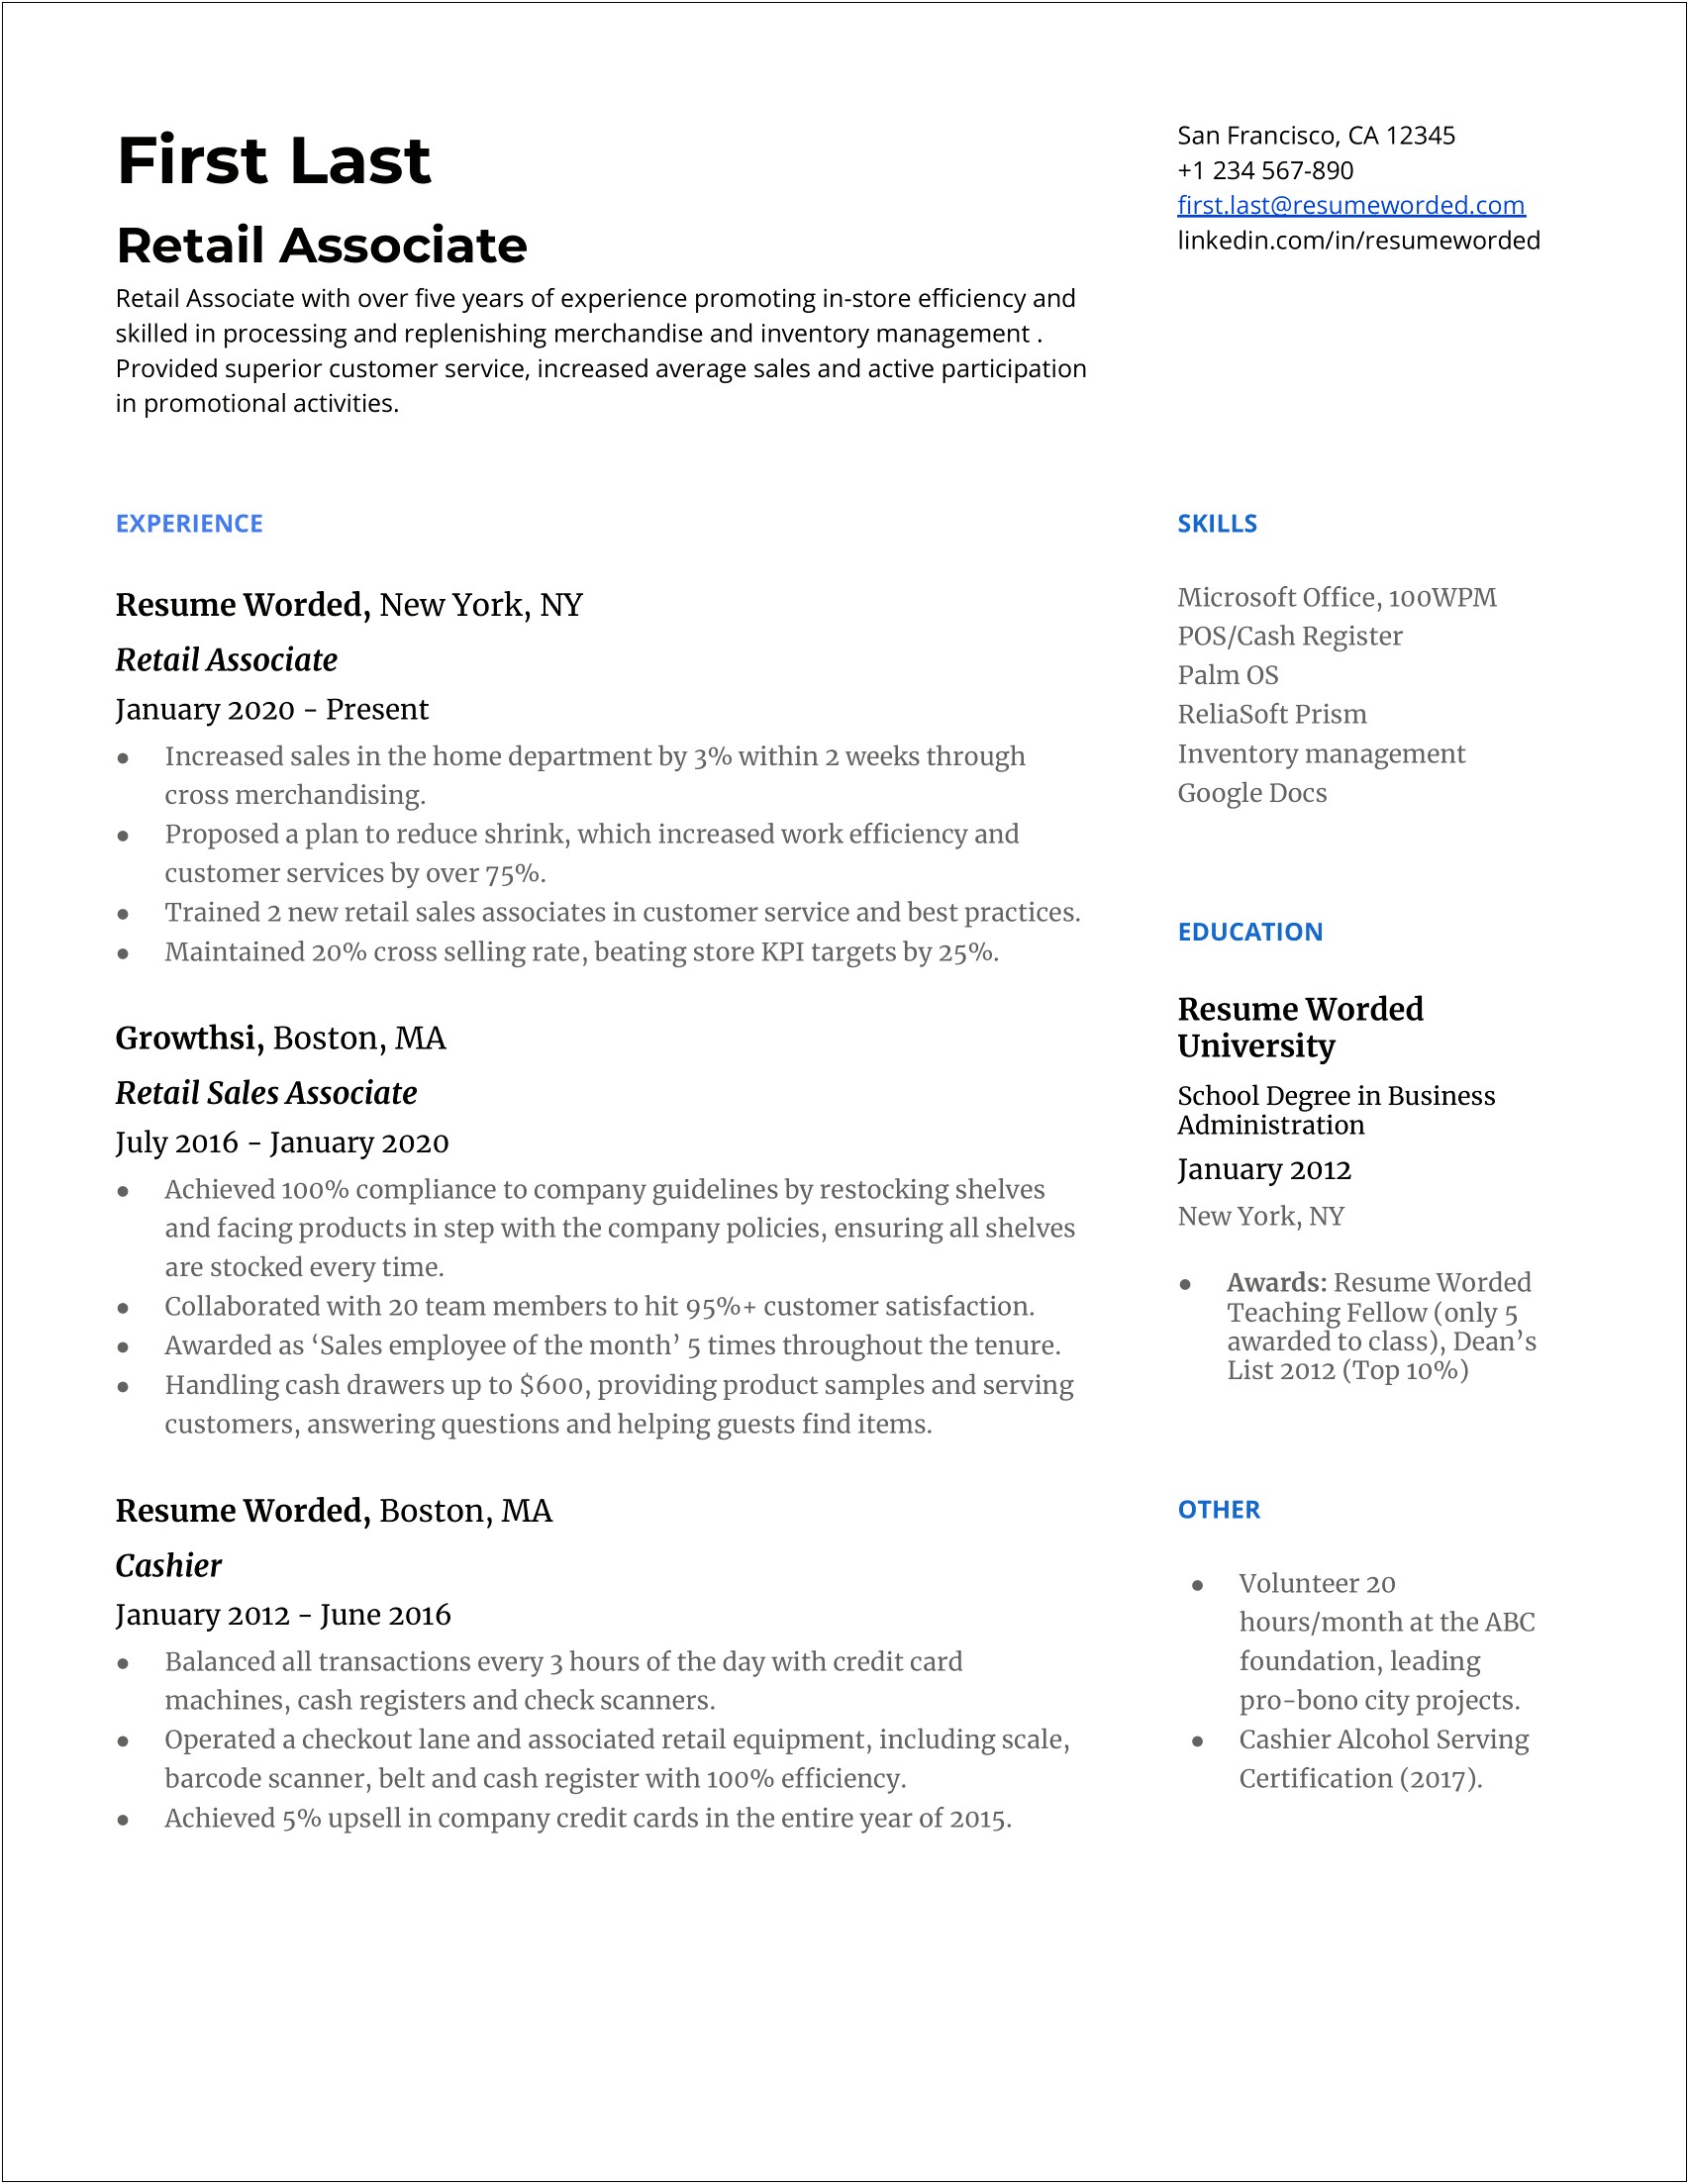 Resume Phrases For Retail Management